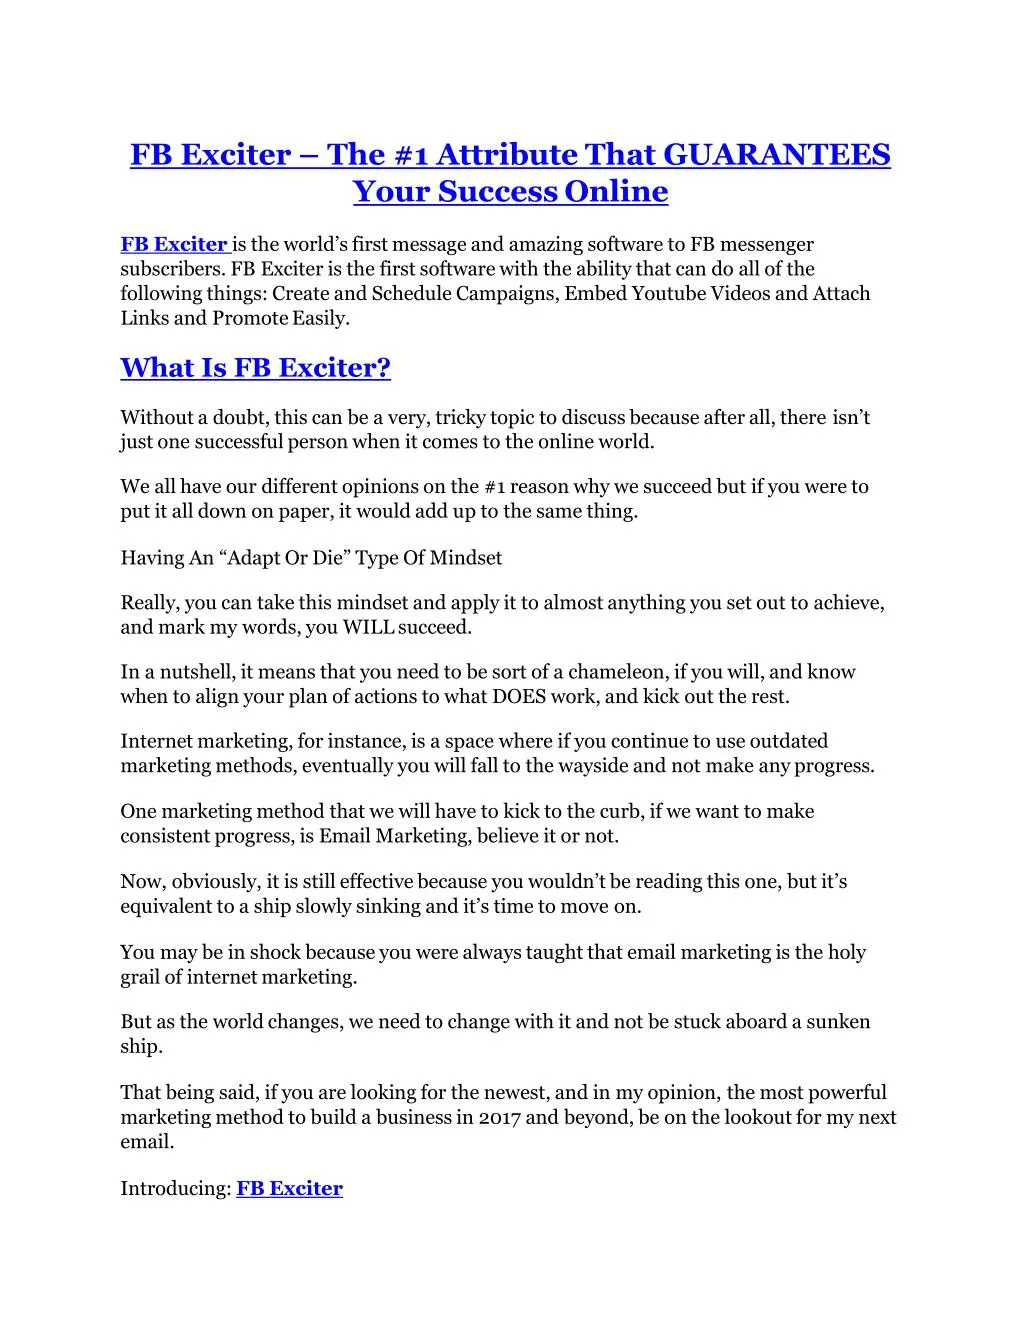 fb exciter the 1 attribute that guarantees your